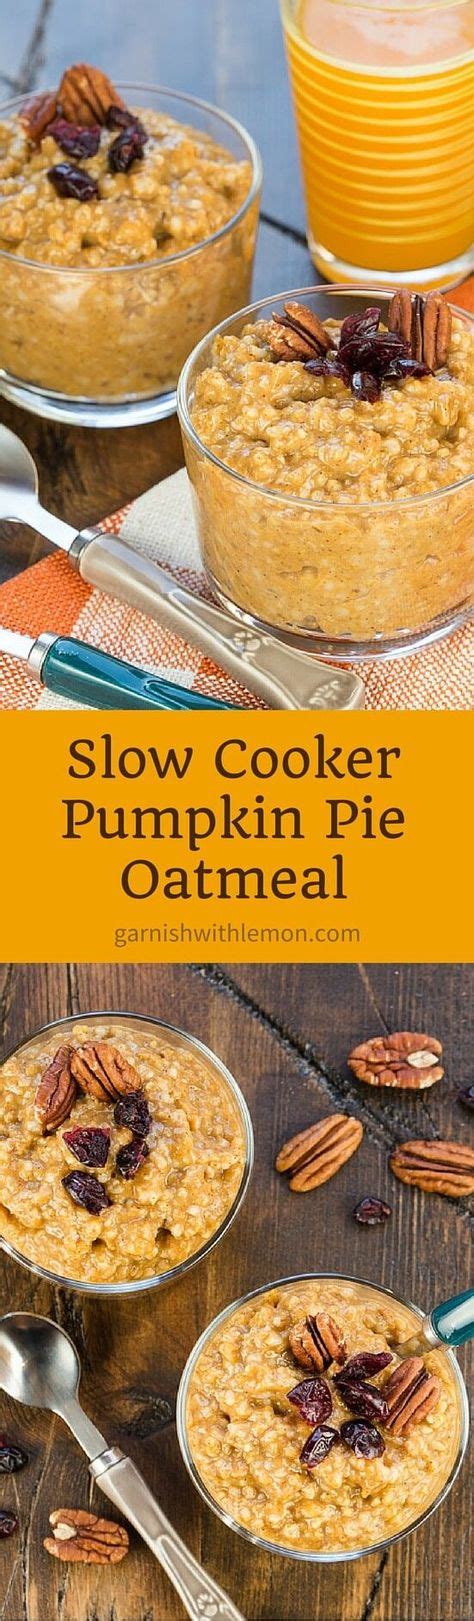 So if you're a longtime fan of pumpkin pie, chances are you've actually been enjoying something more along the lines of butternut squash pie. Yes, you can have pie for breakfast! This no-fuss Slow ...